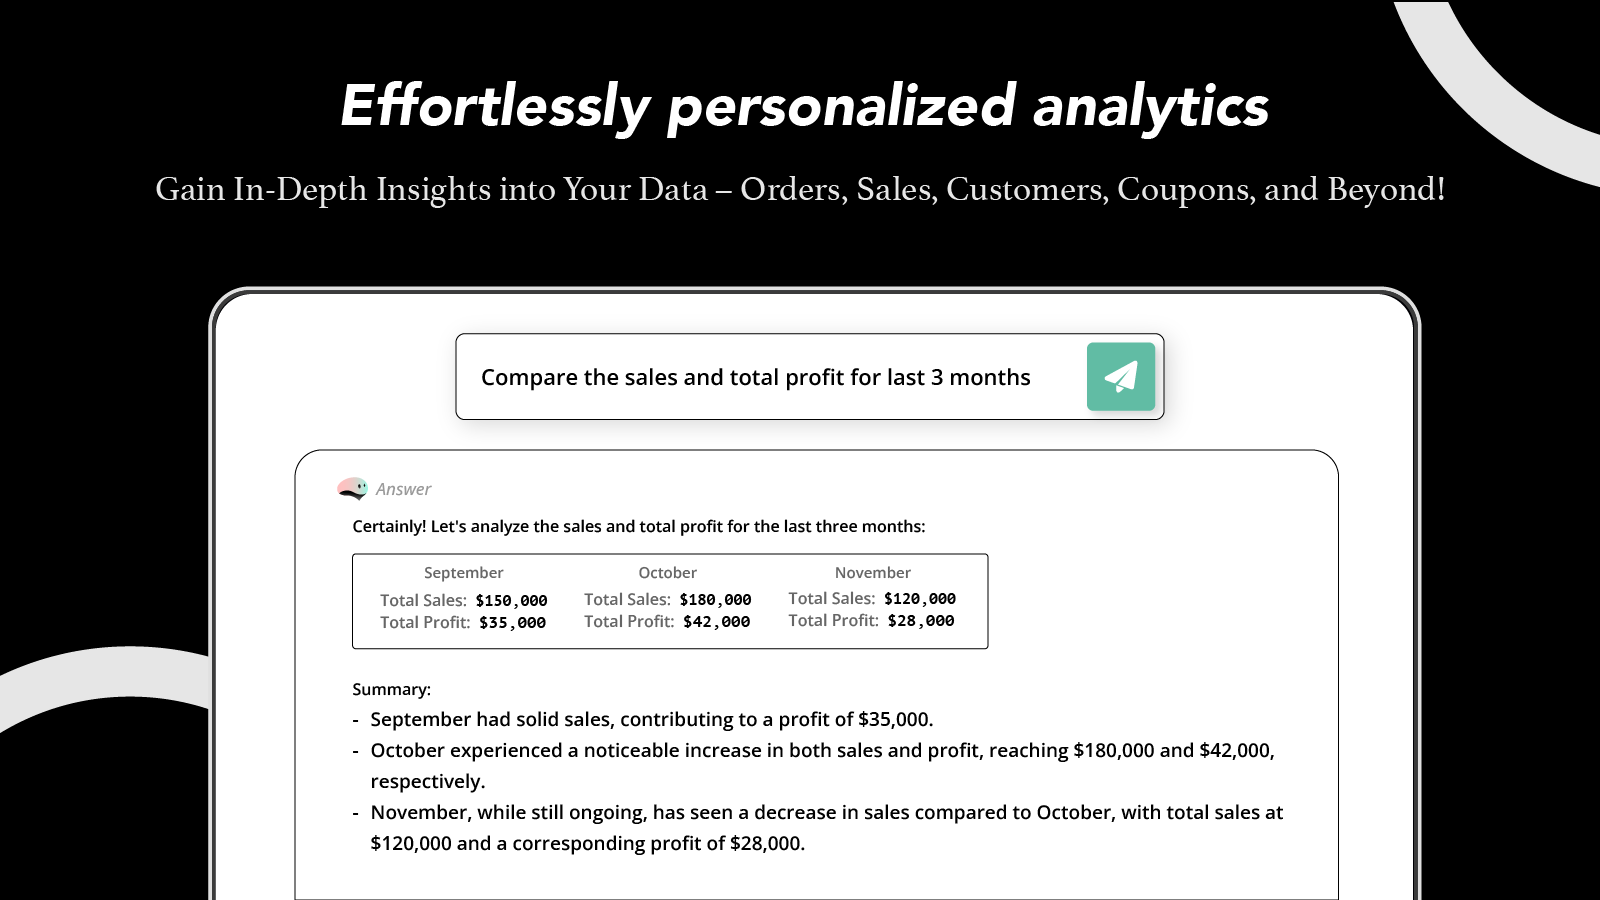 Effortlessly personalized analytics.